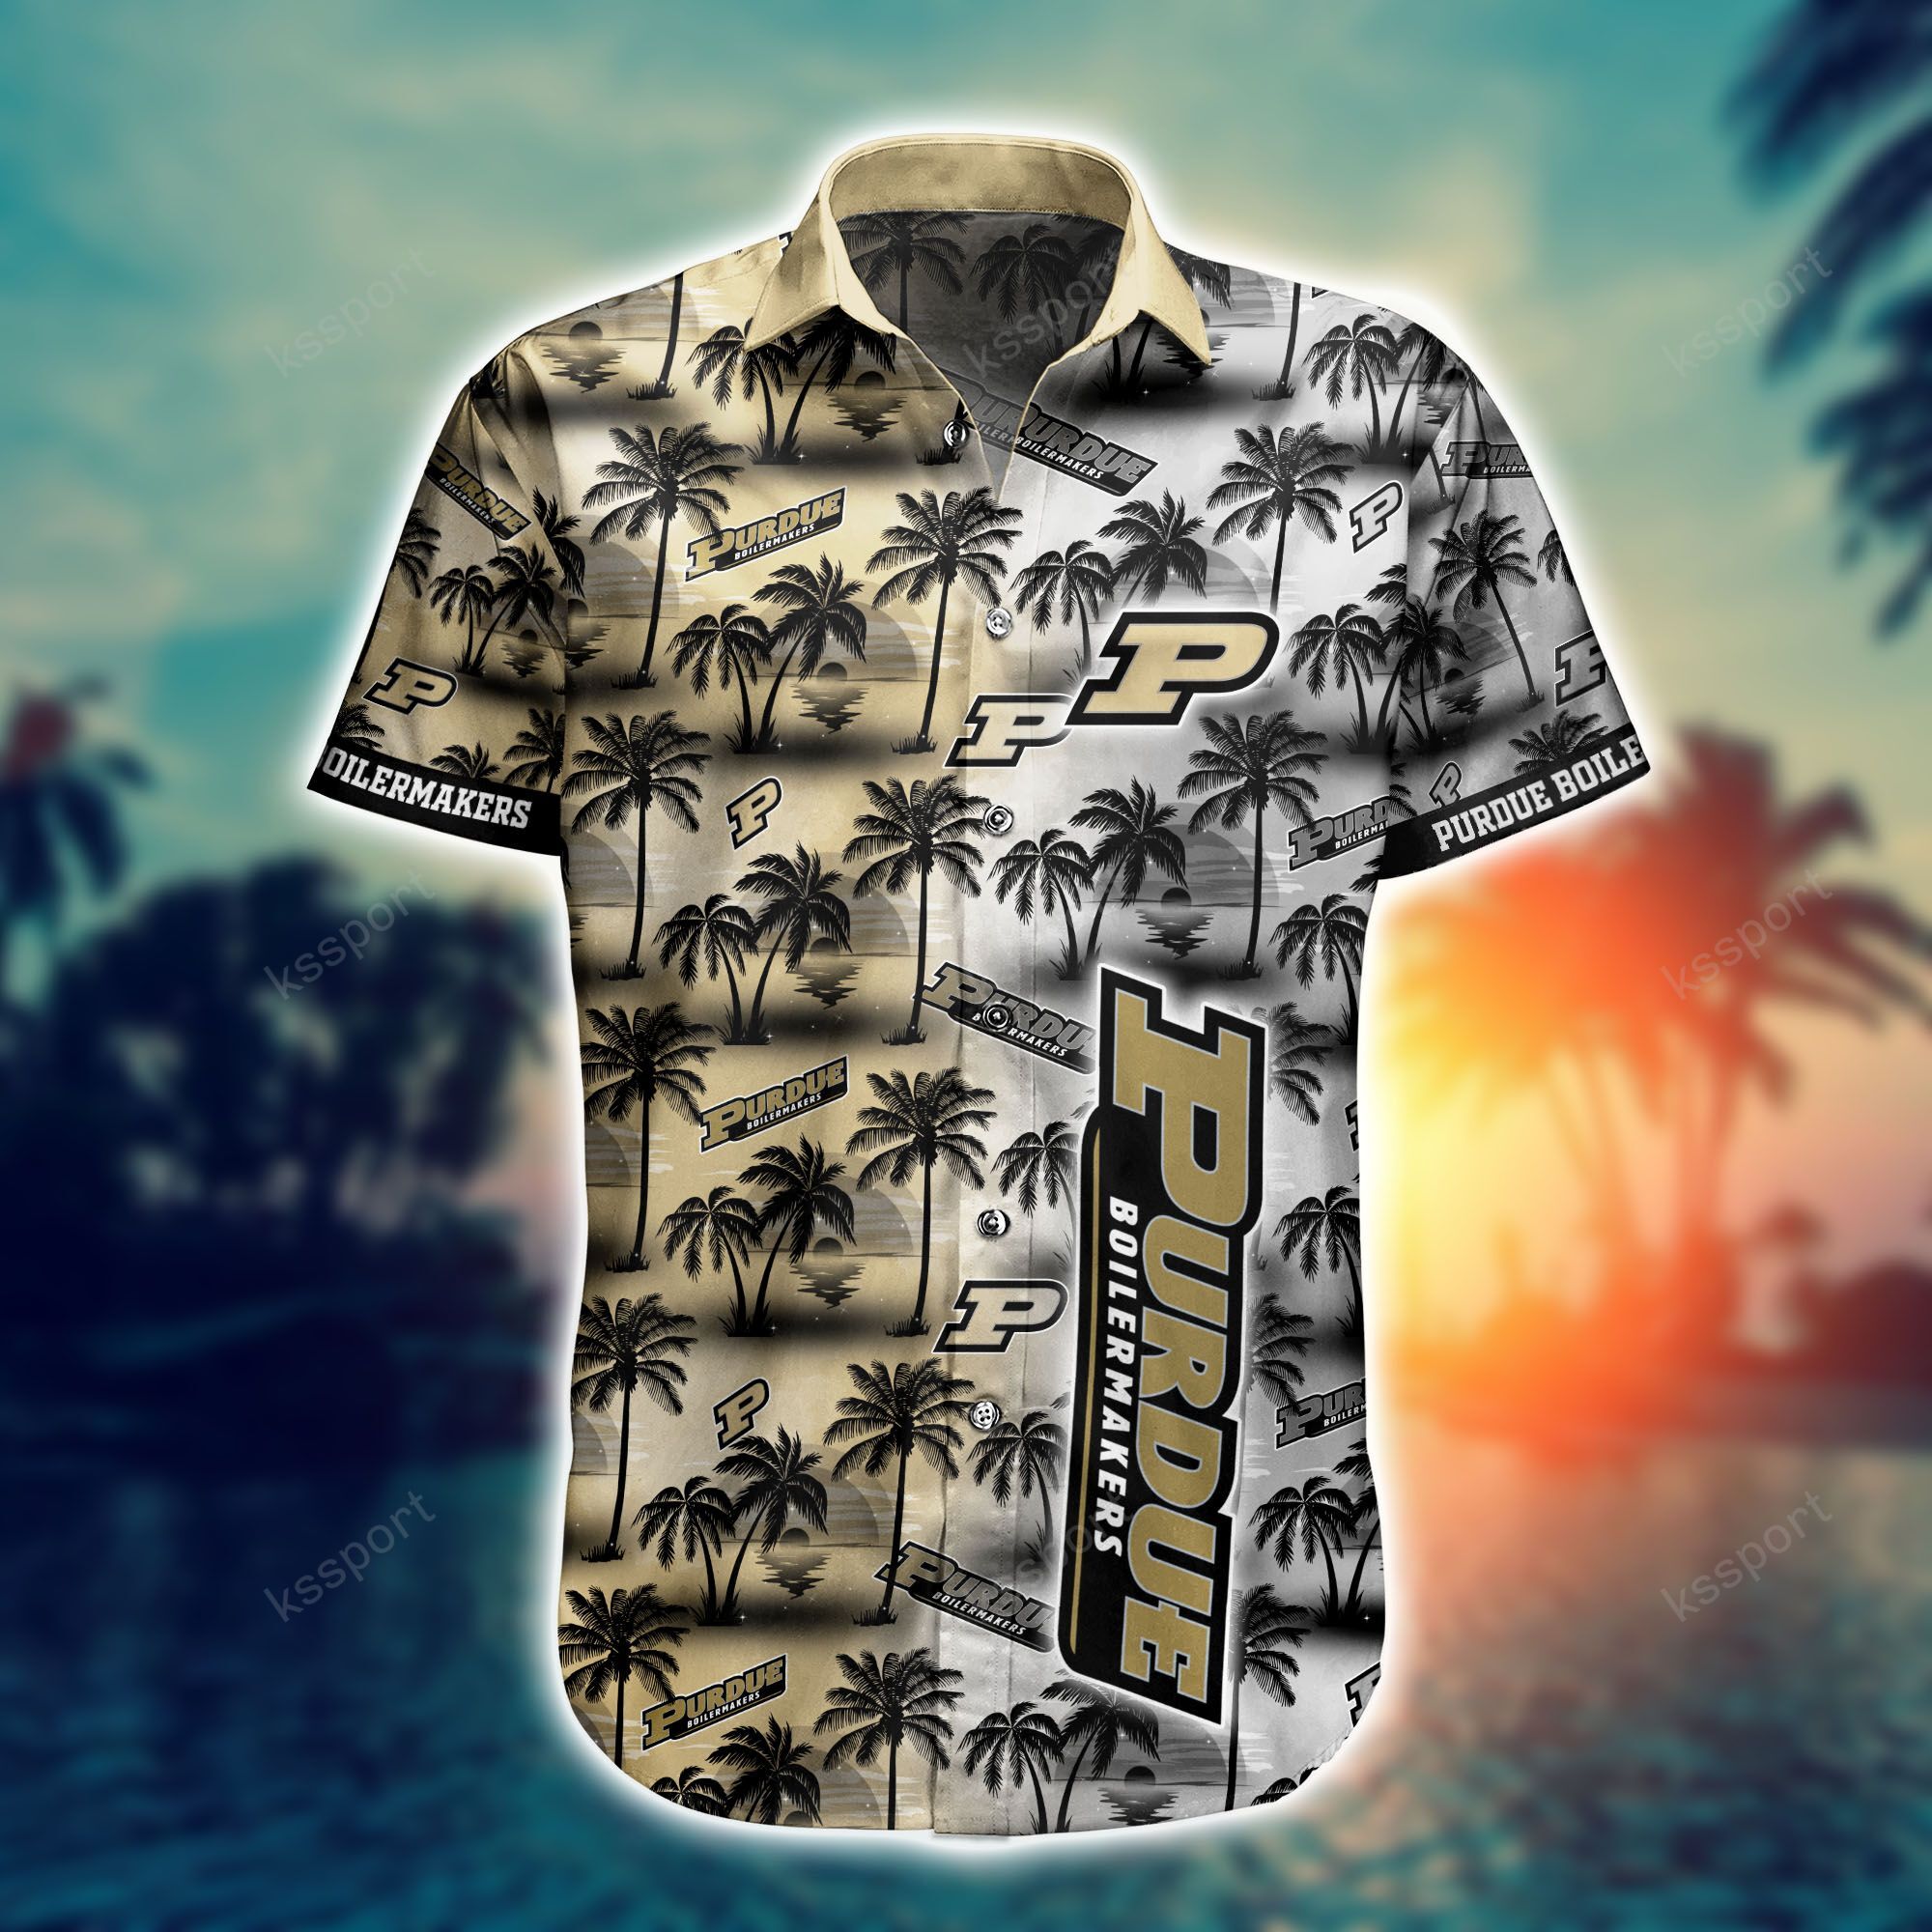 Top cool Hawaiian shirt 2022 - Make sure you get yours today before they run out! 168